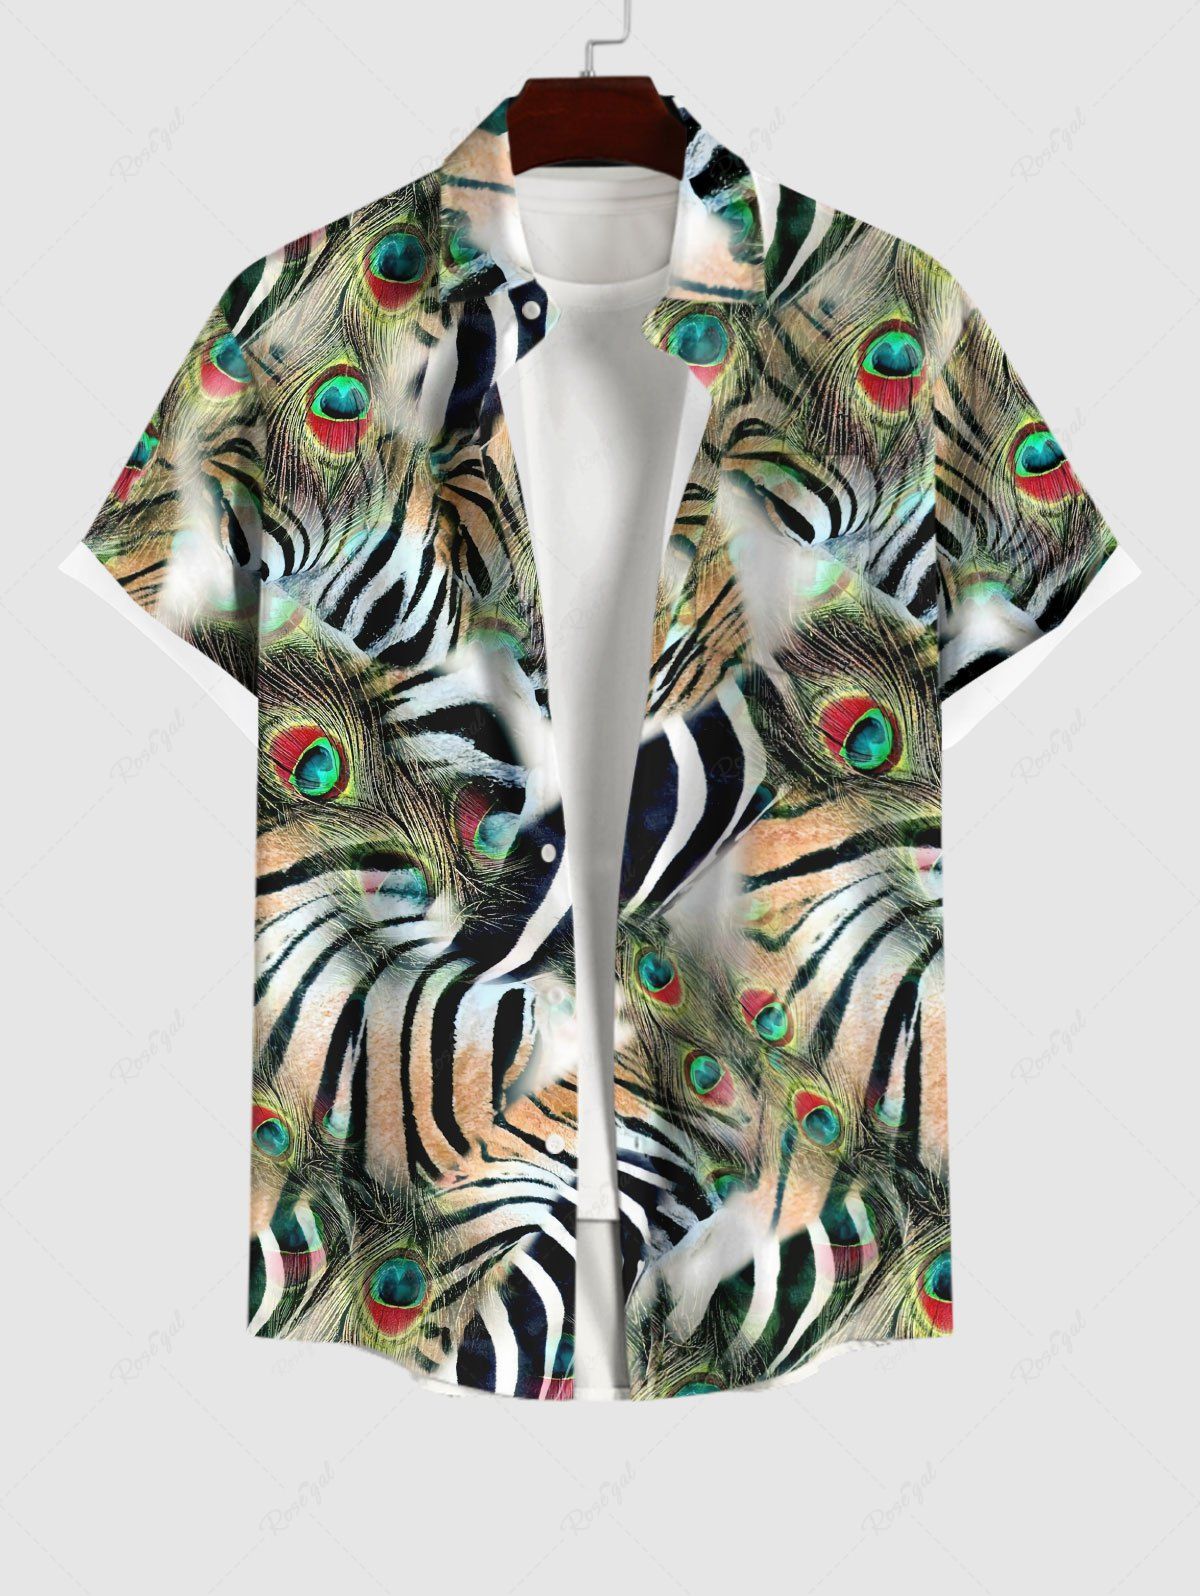 Hot Hawaii Plus Size Turn-down Collar Peacock Feather Tiger Zebra Striped Print Button Pocket Shirt For Men  